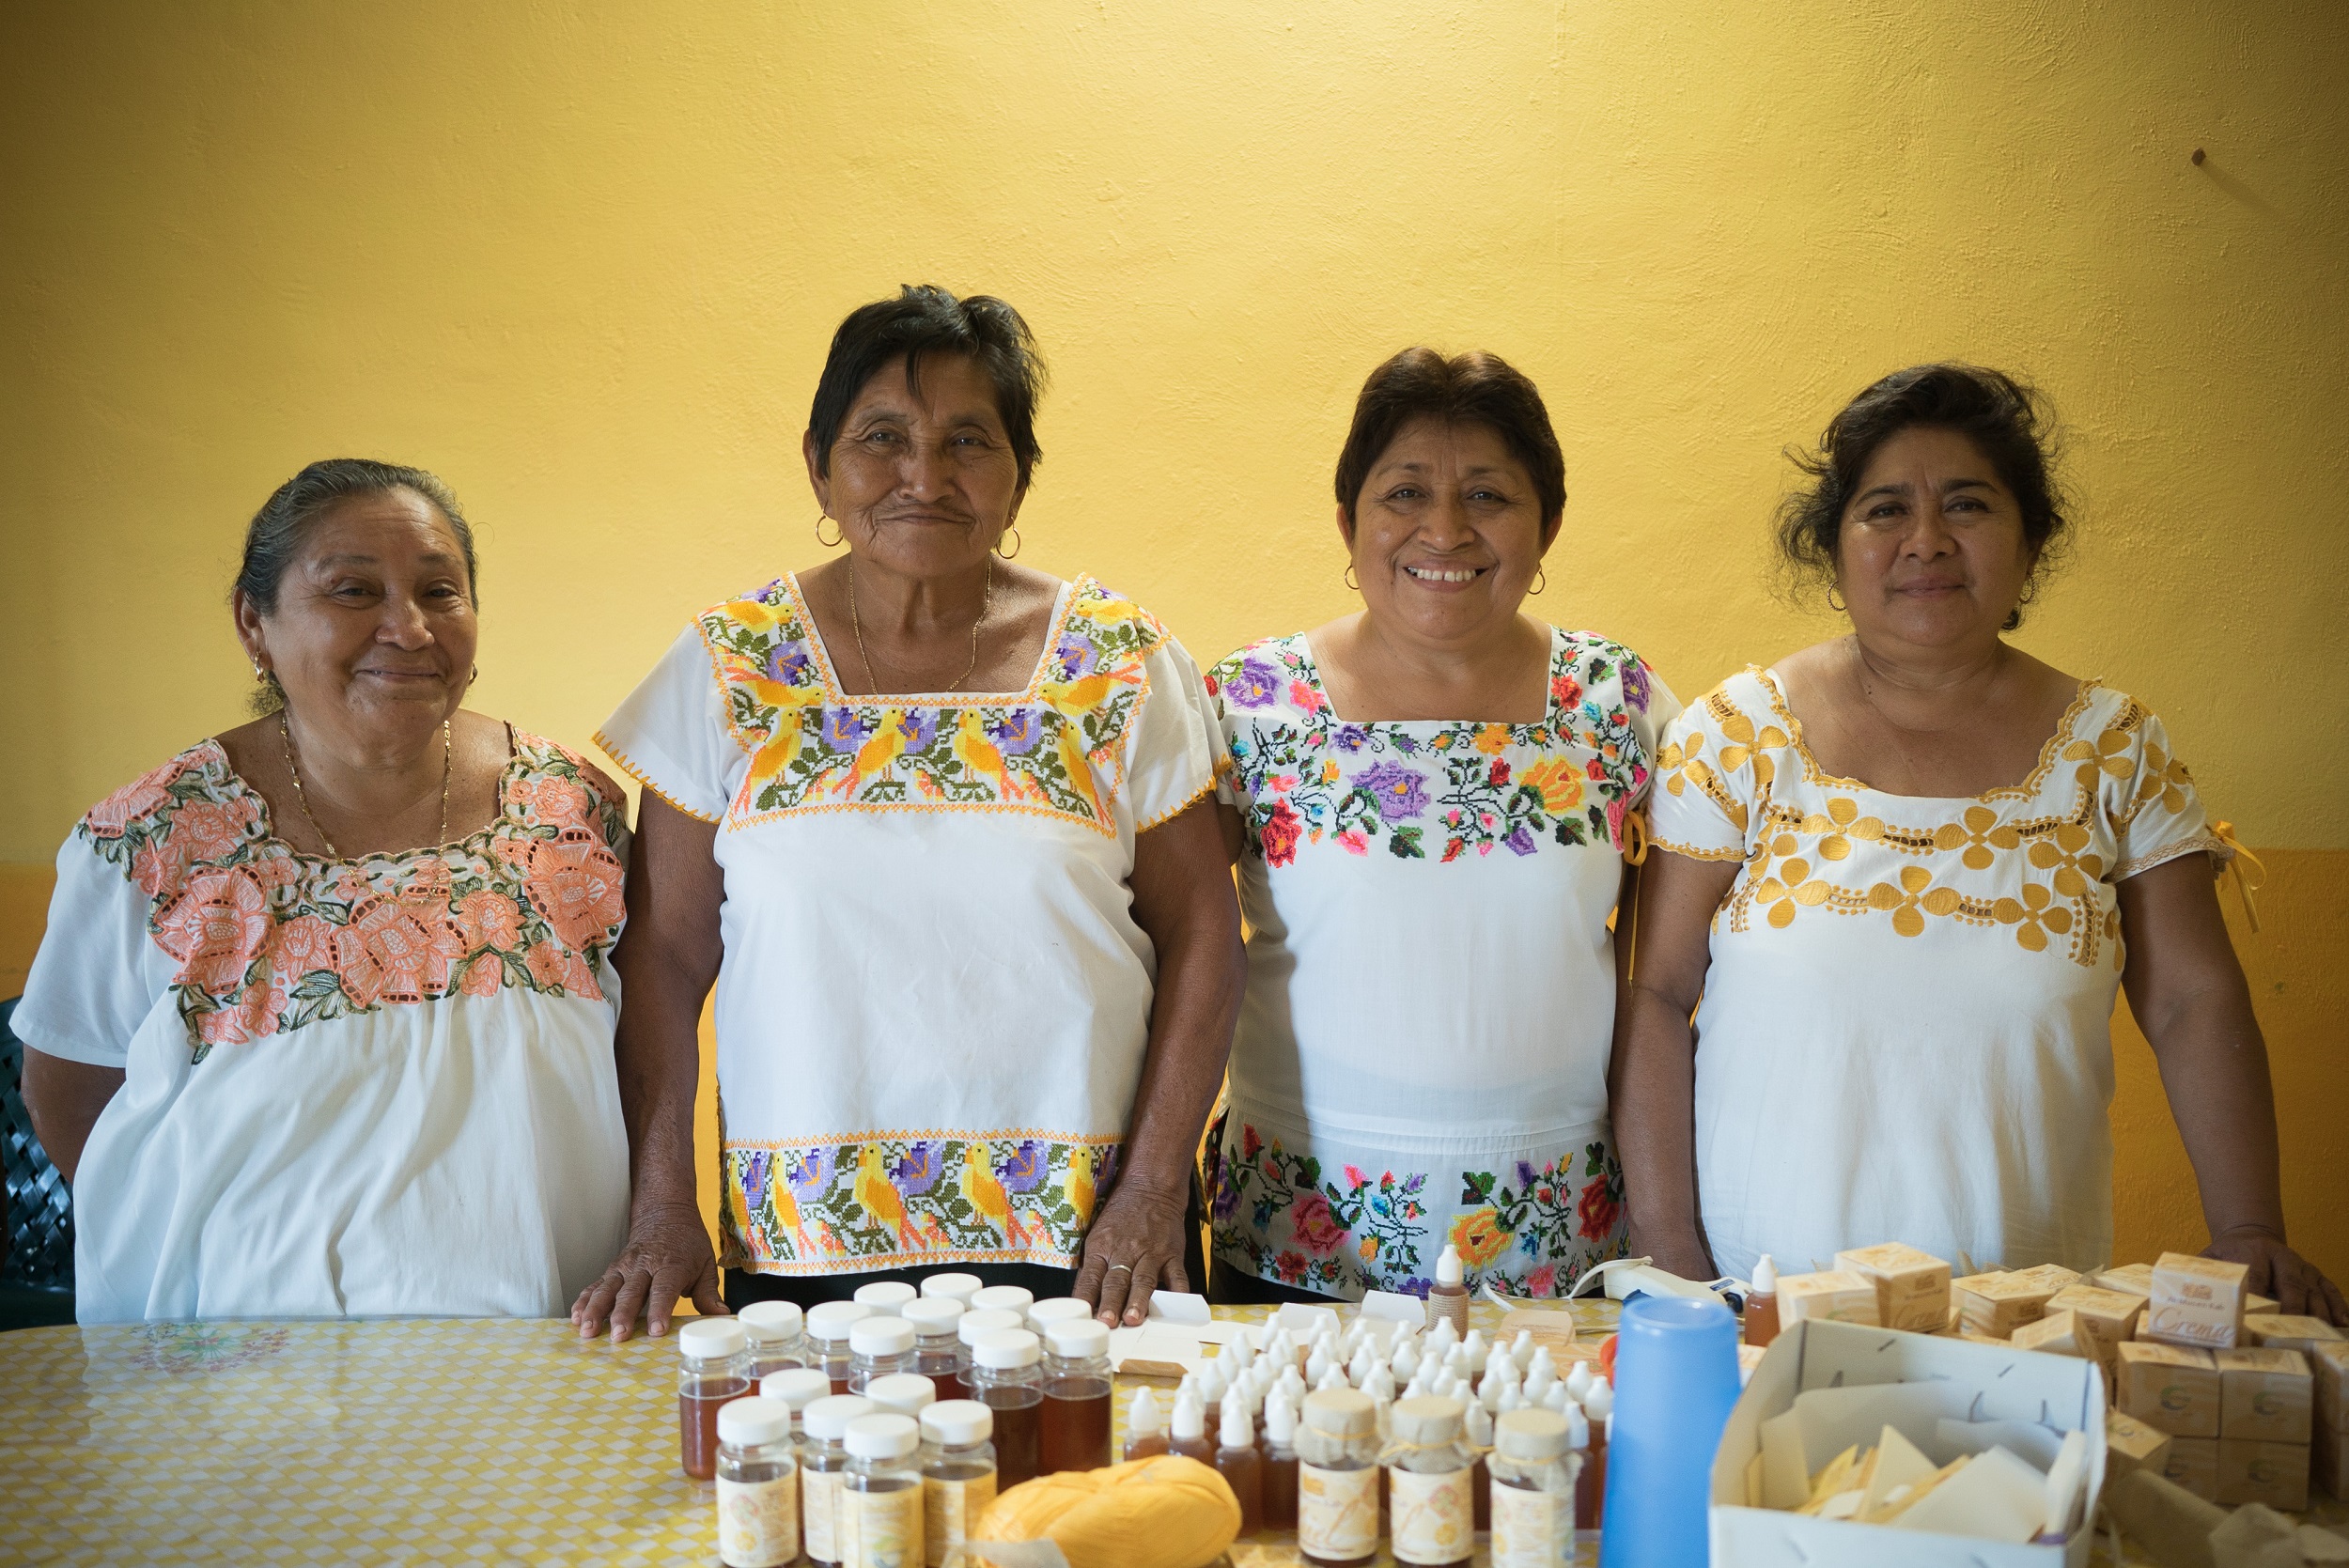 Pech has focused her beekeeping practice on a rare native bee species, Melipona beecheii. She is also a promoter of sustainable development for rural Mayan communities as a member of Koolel-Kab/Muuchkambal, an organic farming and agroforestry cooperative composed solely of Mayan women.